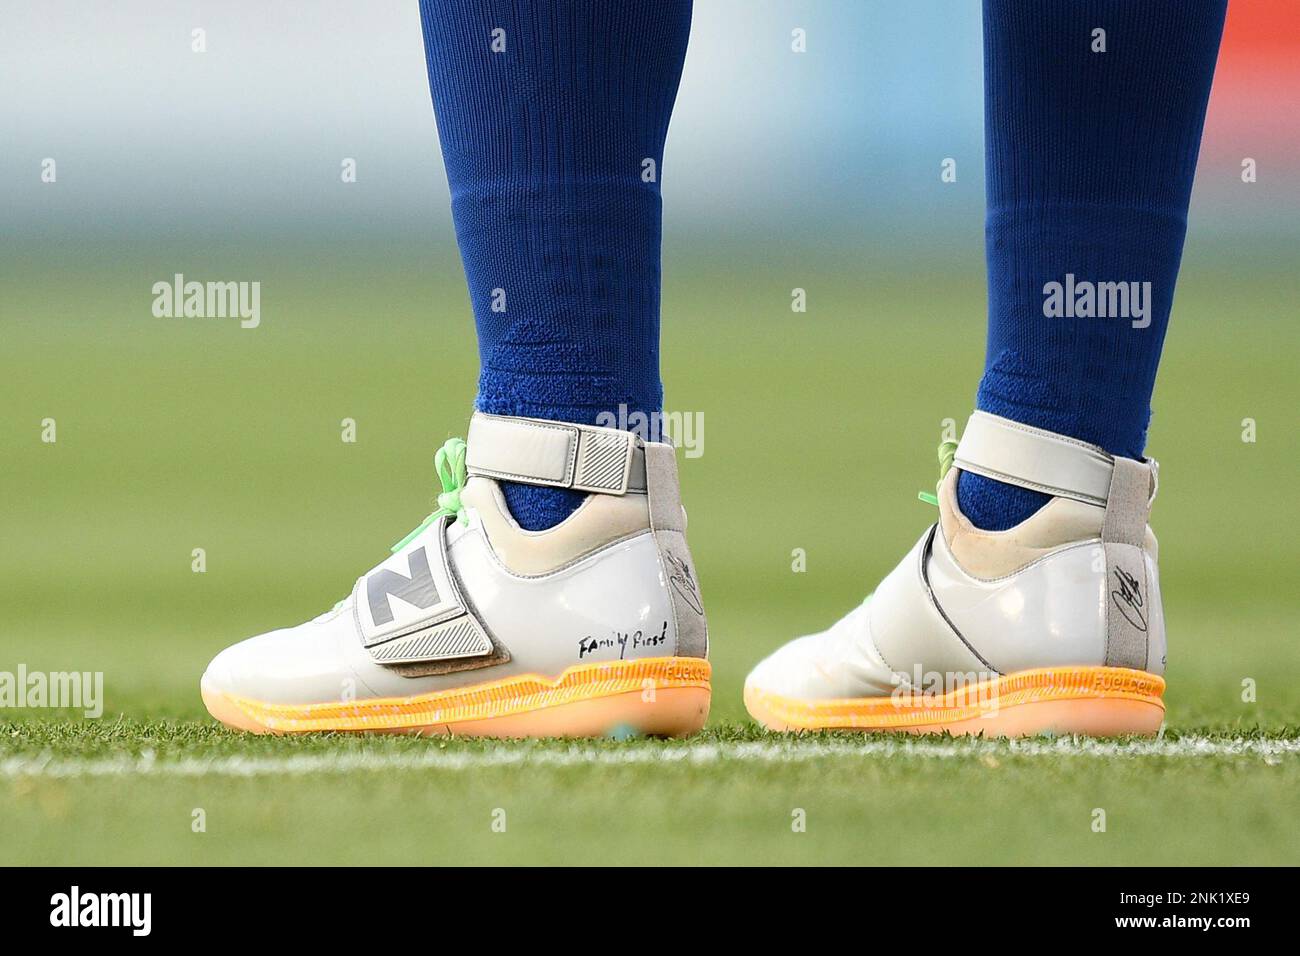 LOS ANGELES, CA - JUNE 03: New York Mets shortstop Francisco Lindor (12)  cleats before the game during the MLB game between the New York Mets and  the Los Angeles Dodgers on